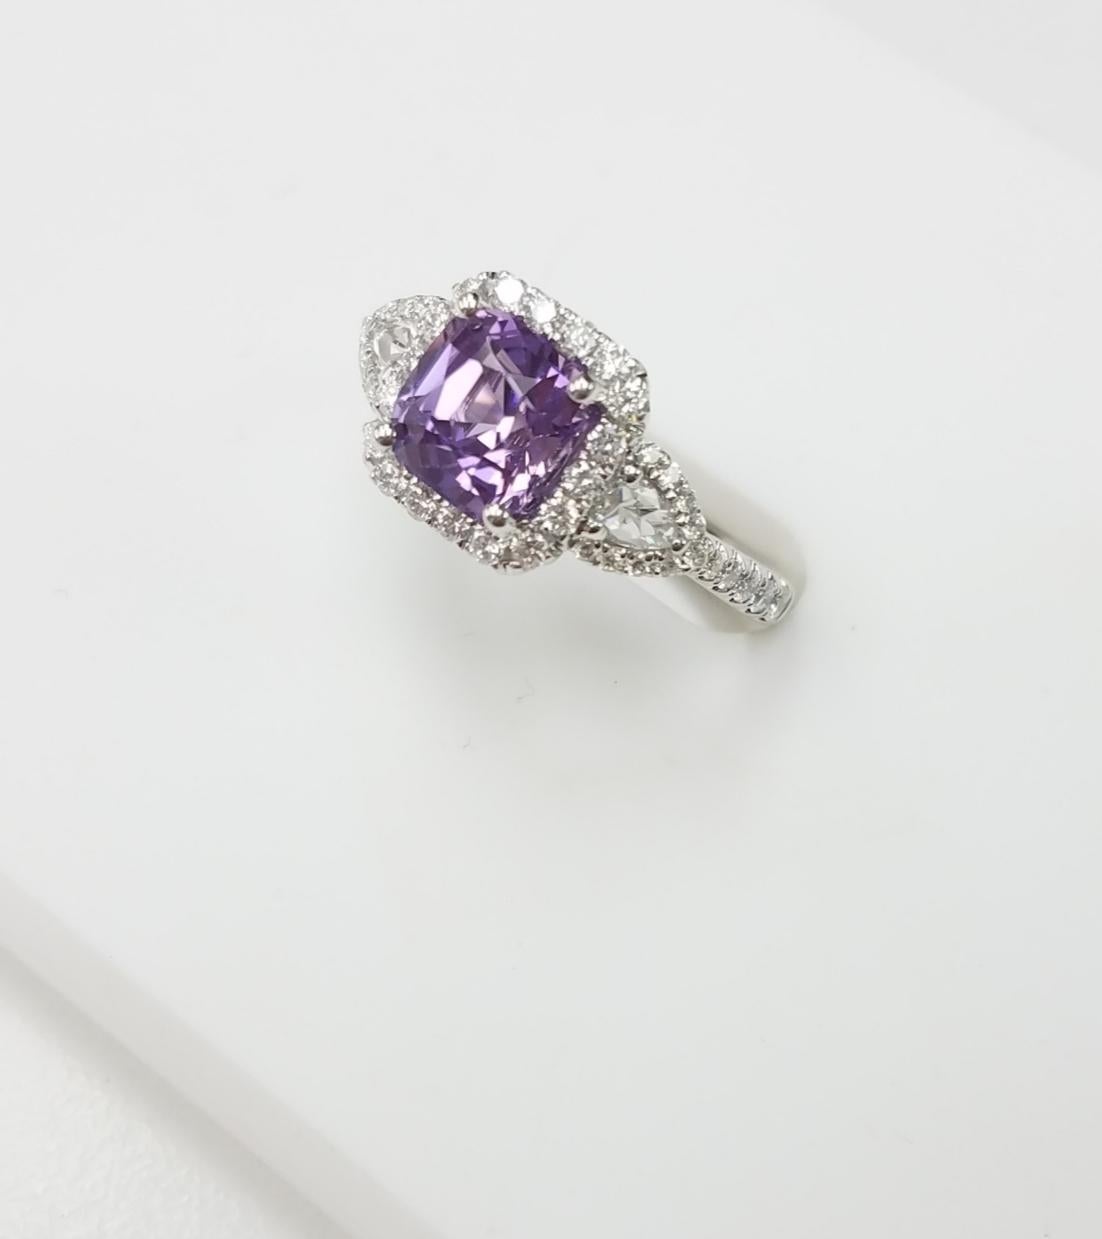 18 Karat White Gold Cushion Cut Natural Lilac Colored Sapphire and Diamond Ring
2.22 Carats of Lilac Colored Sapphires
0.60 Carats of Diamonds
Cushion Cut
18 Karat White Gold